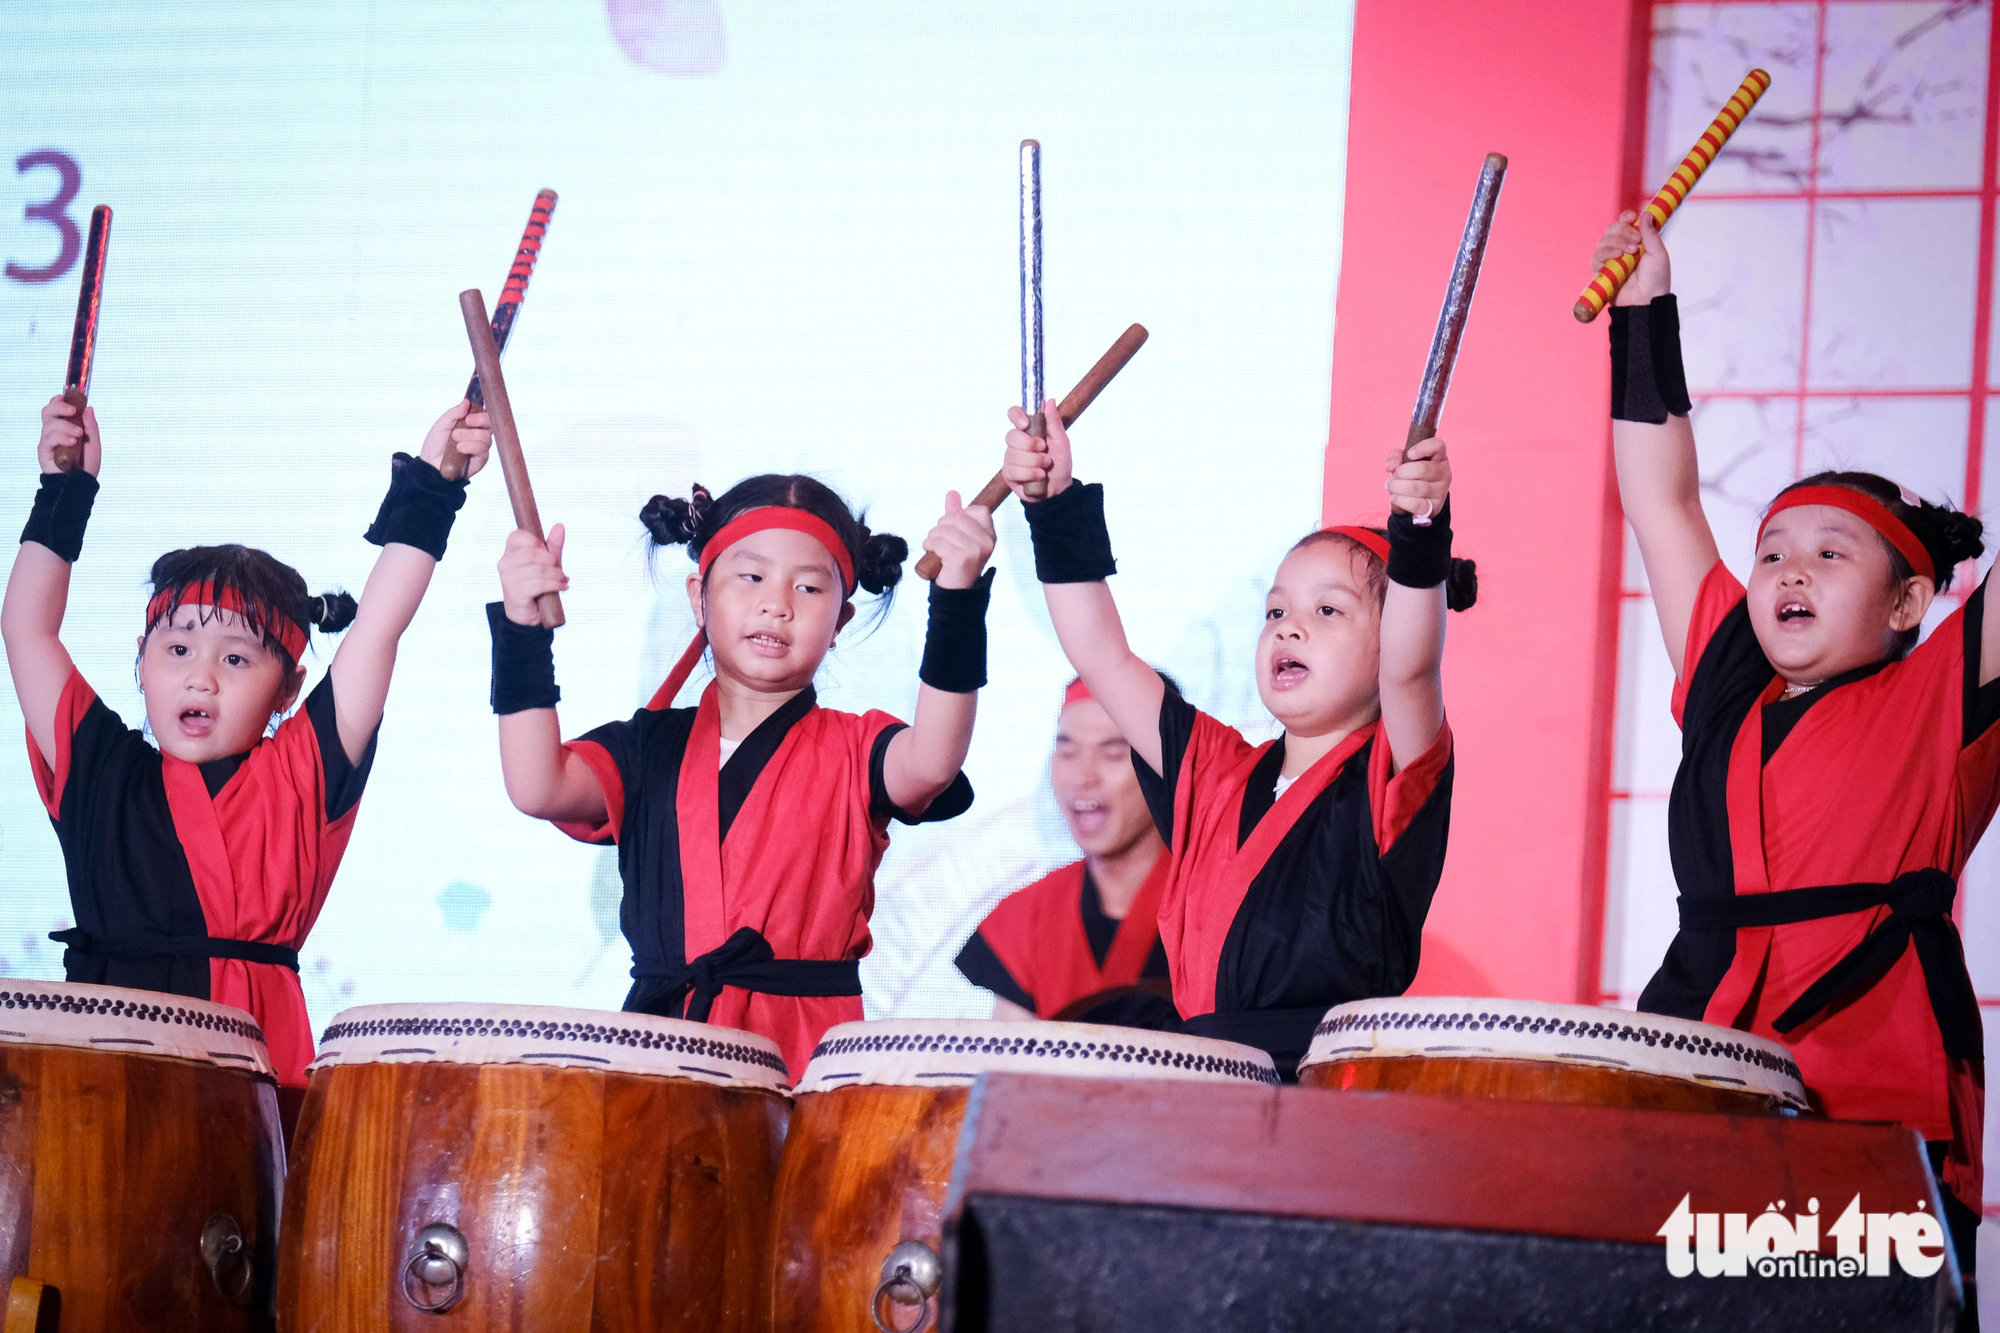 A drumming performance by teachers and students from the Vietnam-Japan School in Da Nang City. Photo: Tan Luc / Tuoi Tre